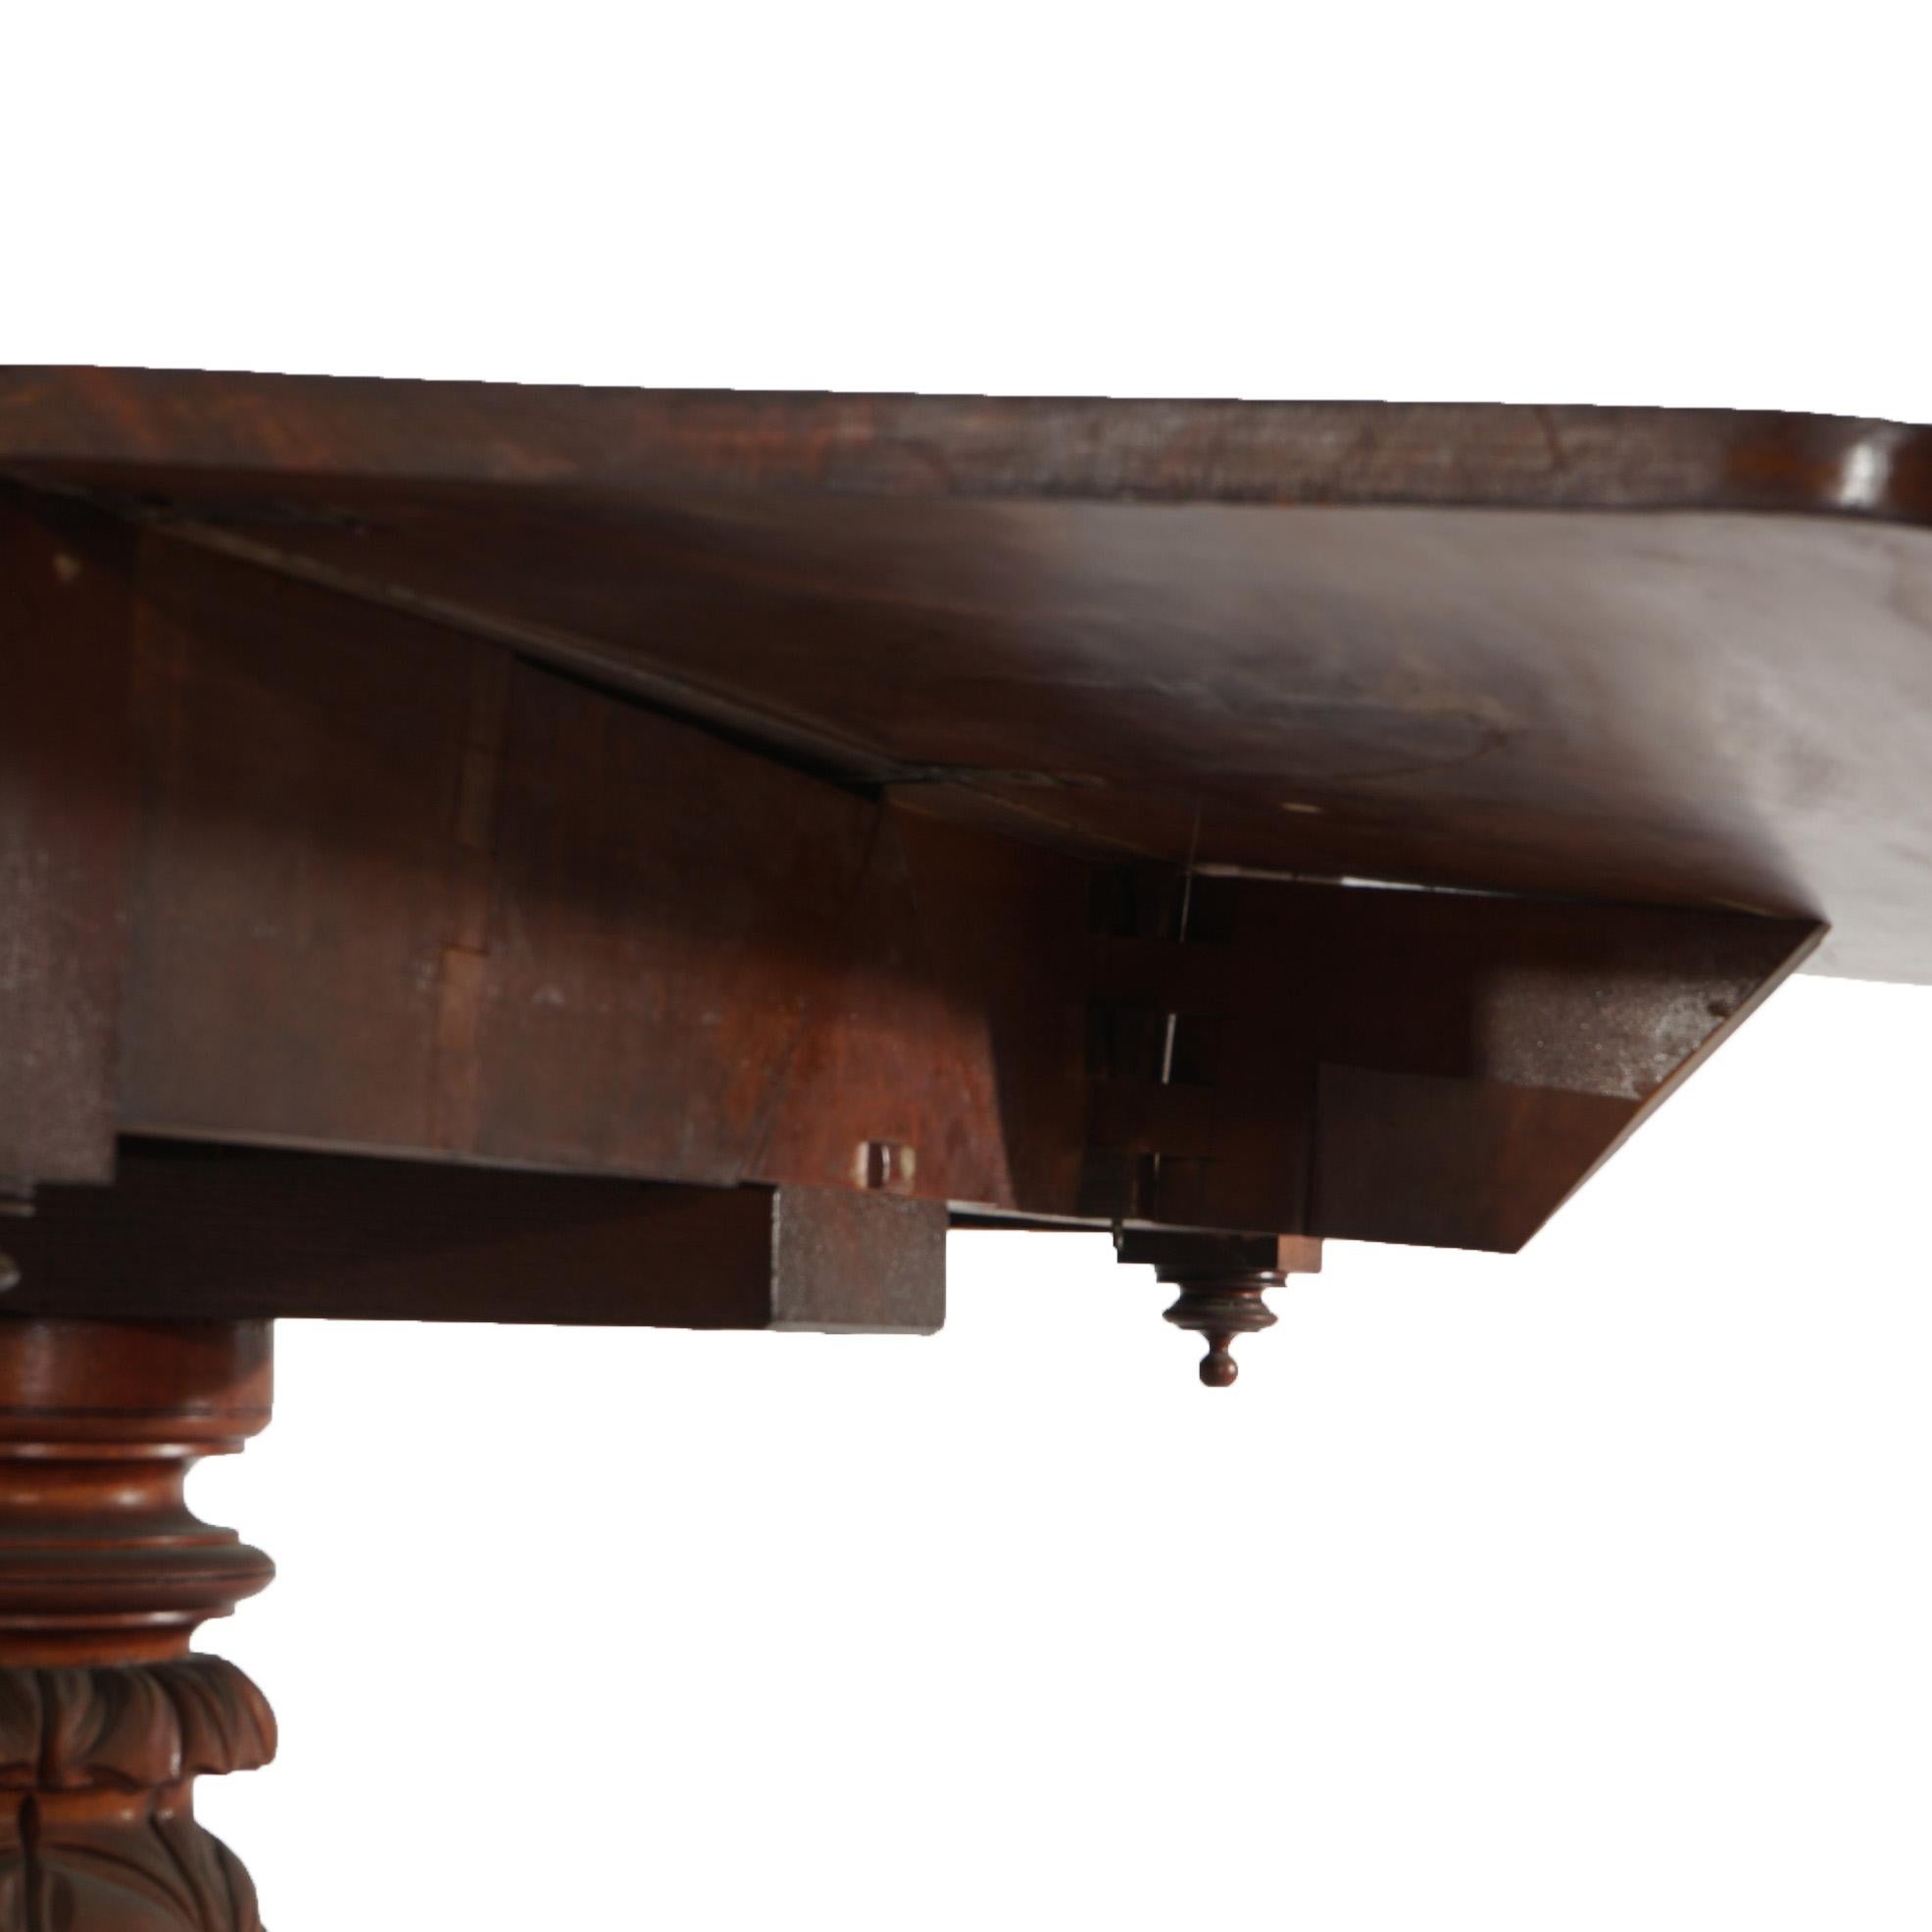 Antique Neoclassical American Empire Carved Flame Mahogany Drop Leaf Table c1880 For Sale 7